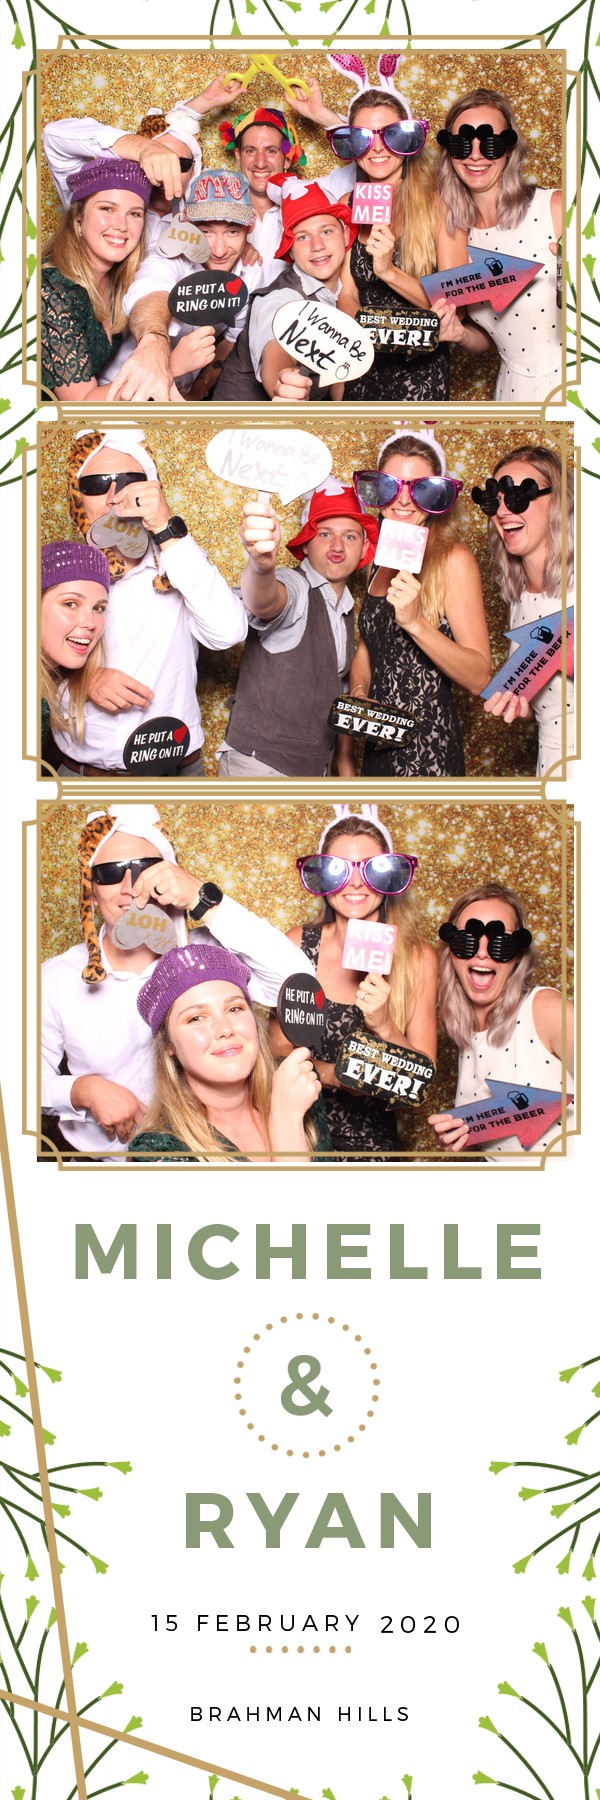 Corporate Event Photo Printing and Photobooths